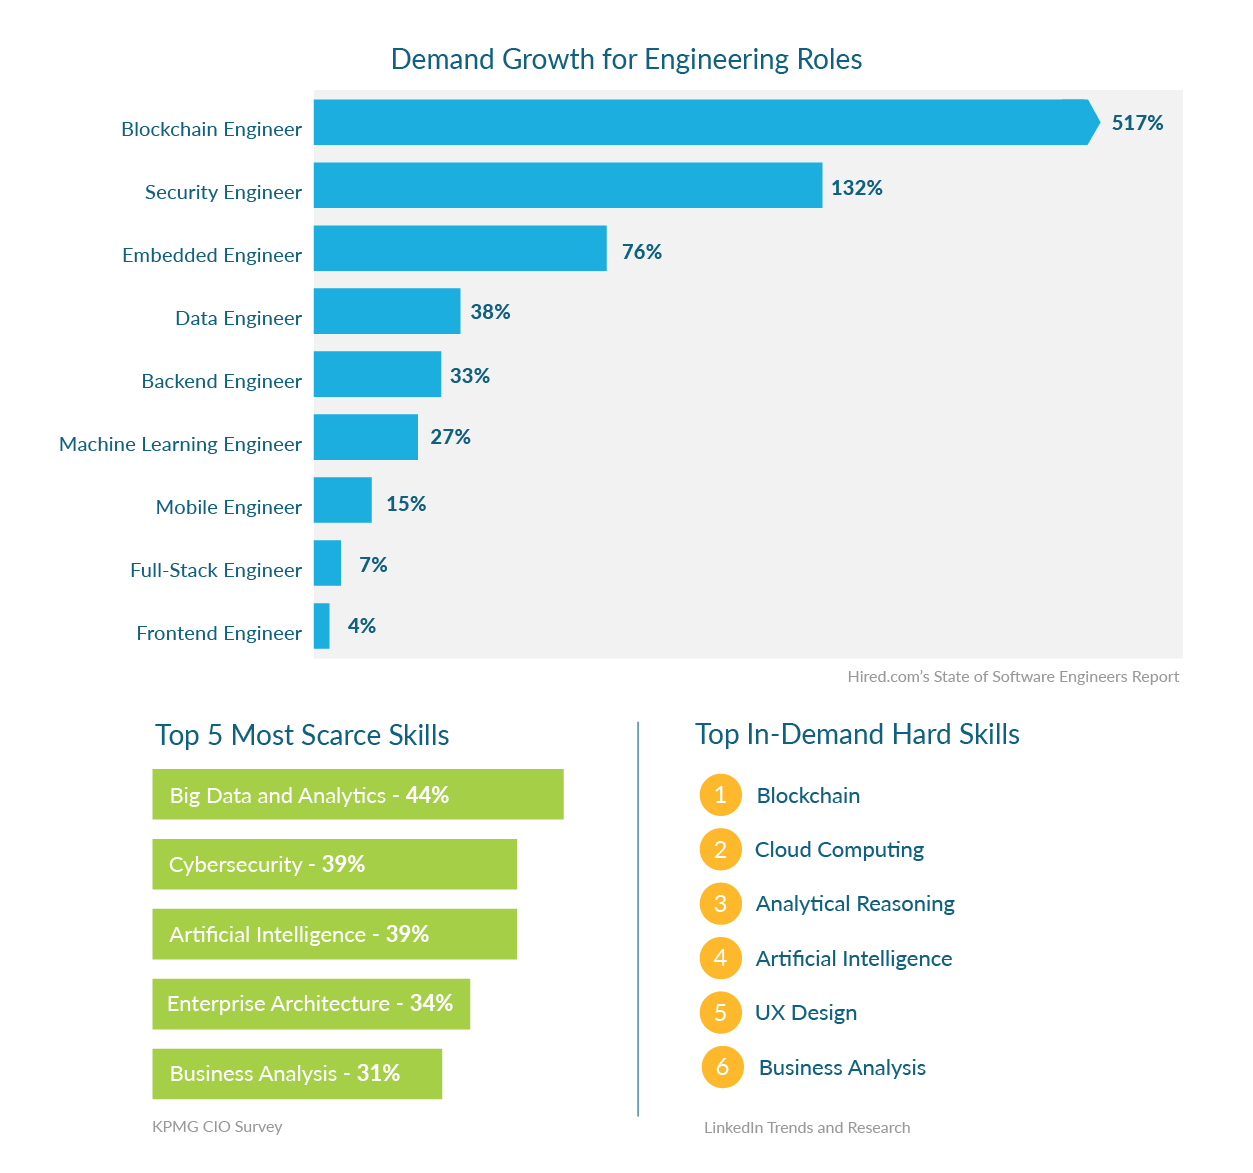 This image contains 3 graphs comparing the shortage of software engineers’ roles and skills. The top is a bar graph with data from the State of Software Engineer’s Report that shows the demand growth for top engineering roles. Blockchain Engineer (517% growth), Security Engineer (132%), Embedded Engineer (76%), Data Engineer (38%), Backend Engineer (33%), Machine Learning Engineer (27%), Mobile Engineer (15%), Full-Stack Engineer (7%), Frontend Engineer (4%). Below you see a bar graph listing KPMG’s CIO Survey’s most scarce skills: Big Data and Analytics (44%), Cybersecurity (39%), Artificial Intelligence (39%), Enterprise Architecture (34%), Business Analysis (31%). On the bottom right is a list of LinkedIn’s top in-demand skills: 1. Blockchain, 2. Cloud Computing, 3. Analytical Reasoning, 4. Artificial Intelligence, 5. UX Design, 6. Business Analysis. 